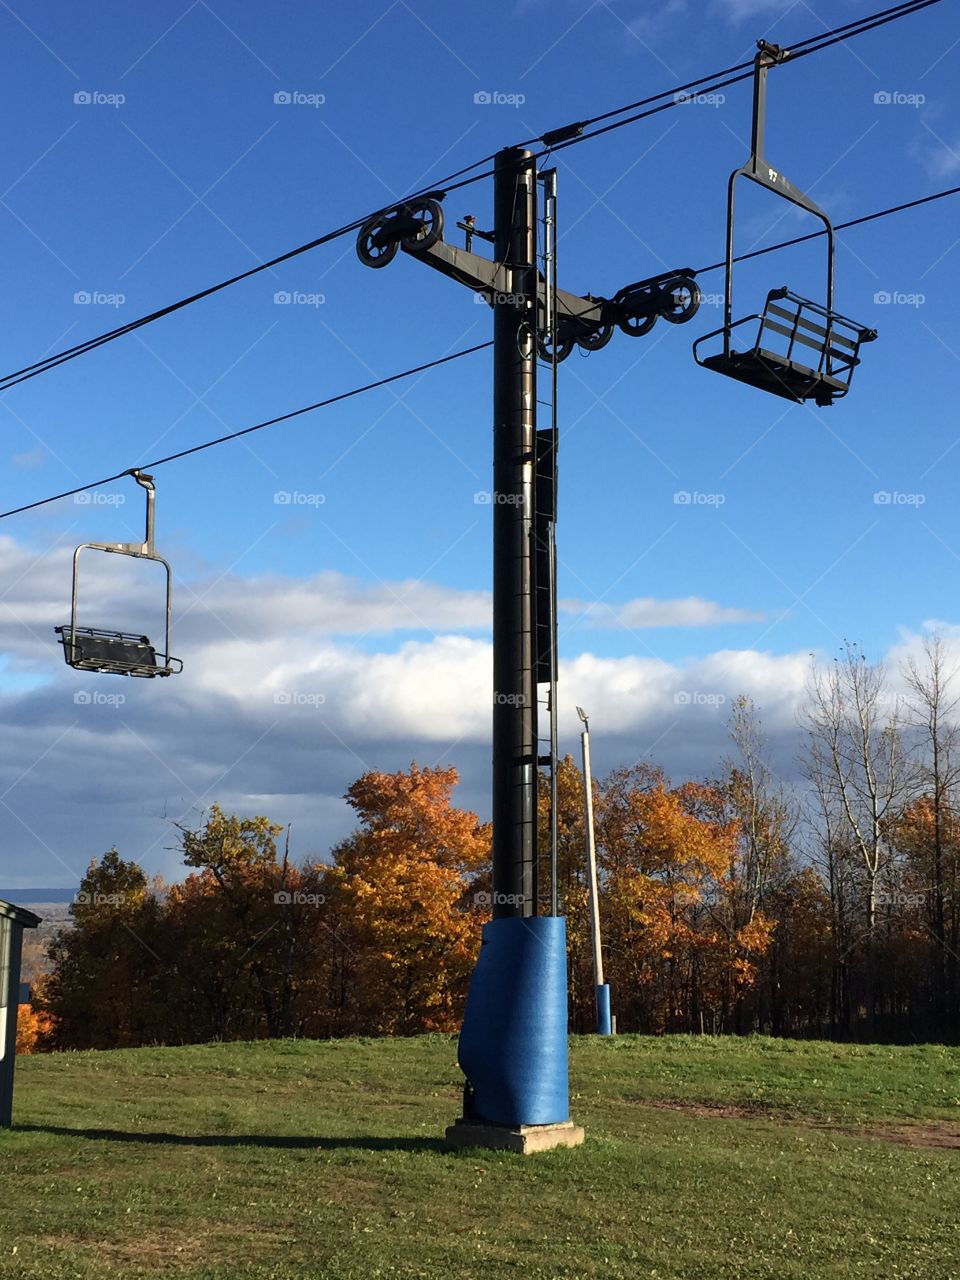 Lift in the Fall